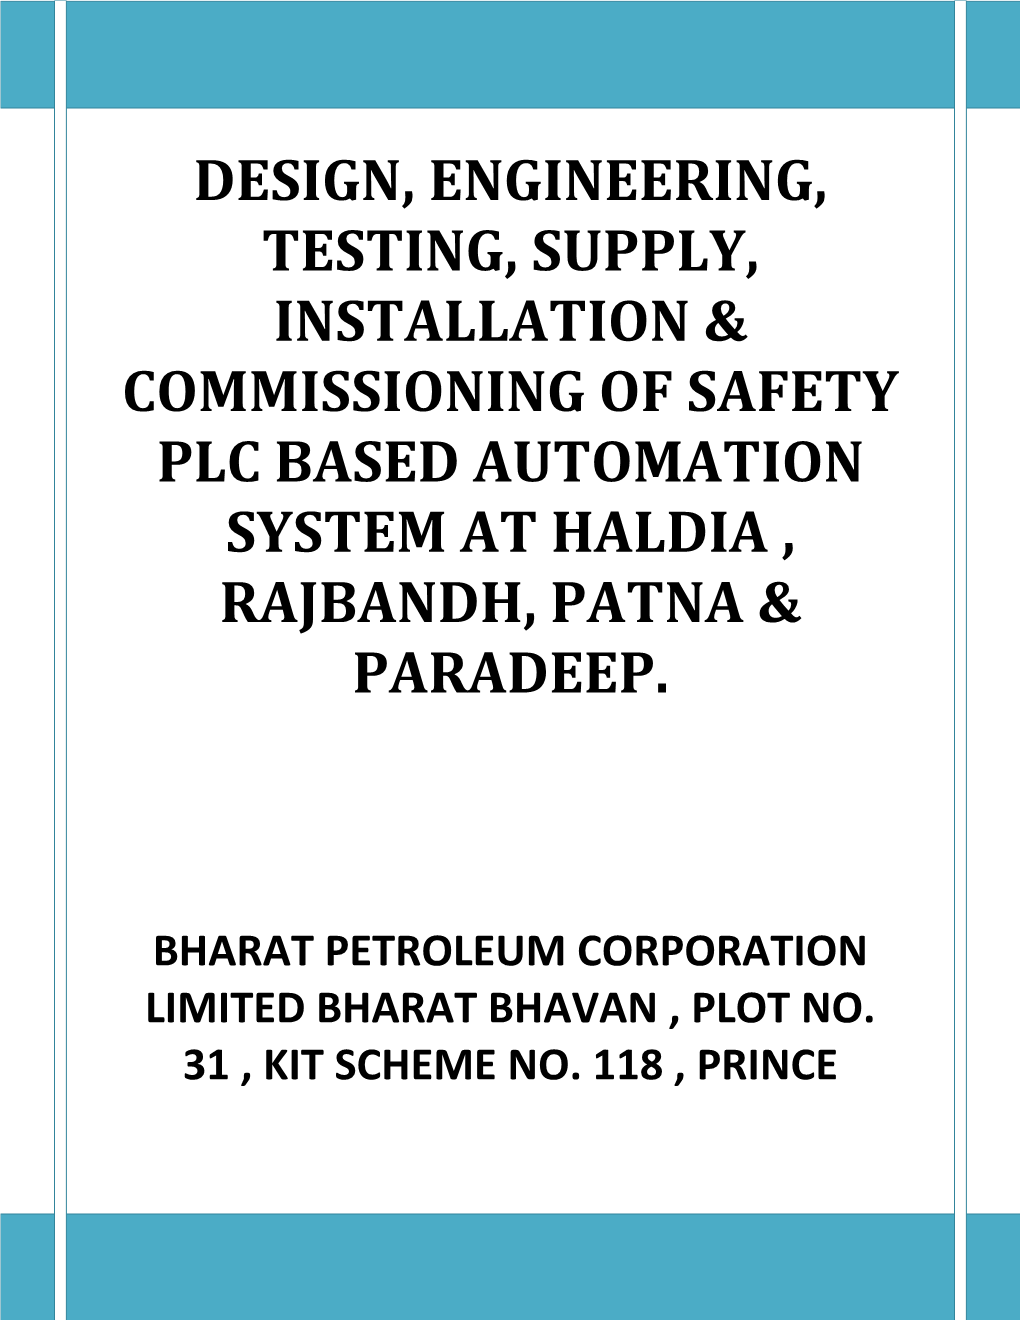 Design, Engineering, Testing, Supply, Installation & Commissioning of Safety Plc Based